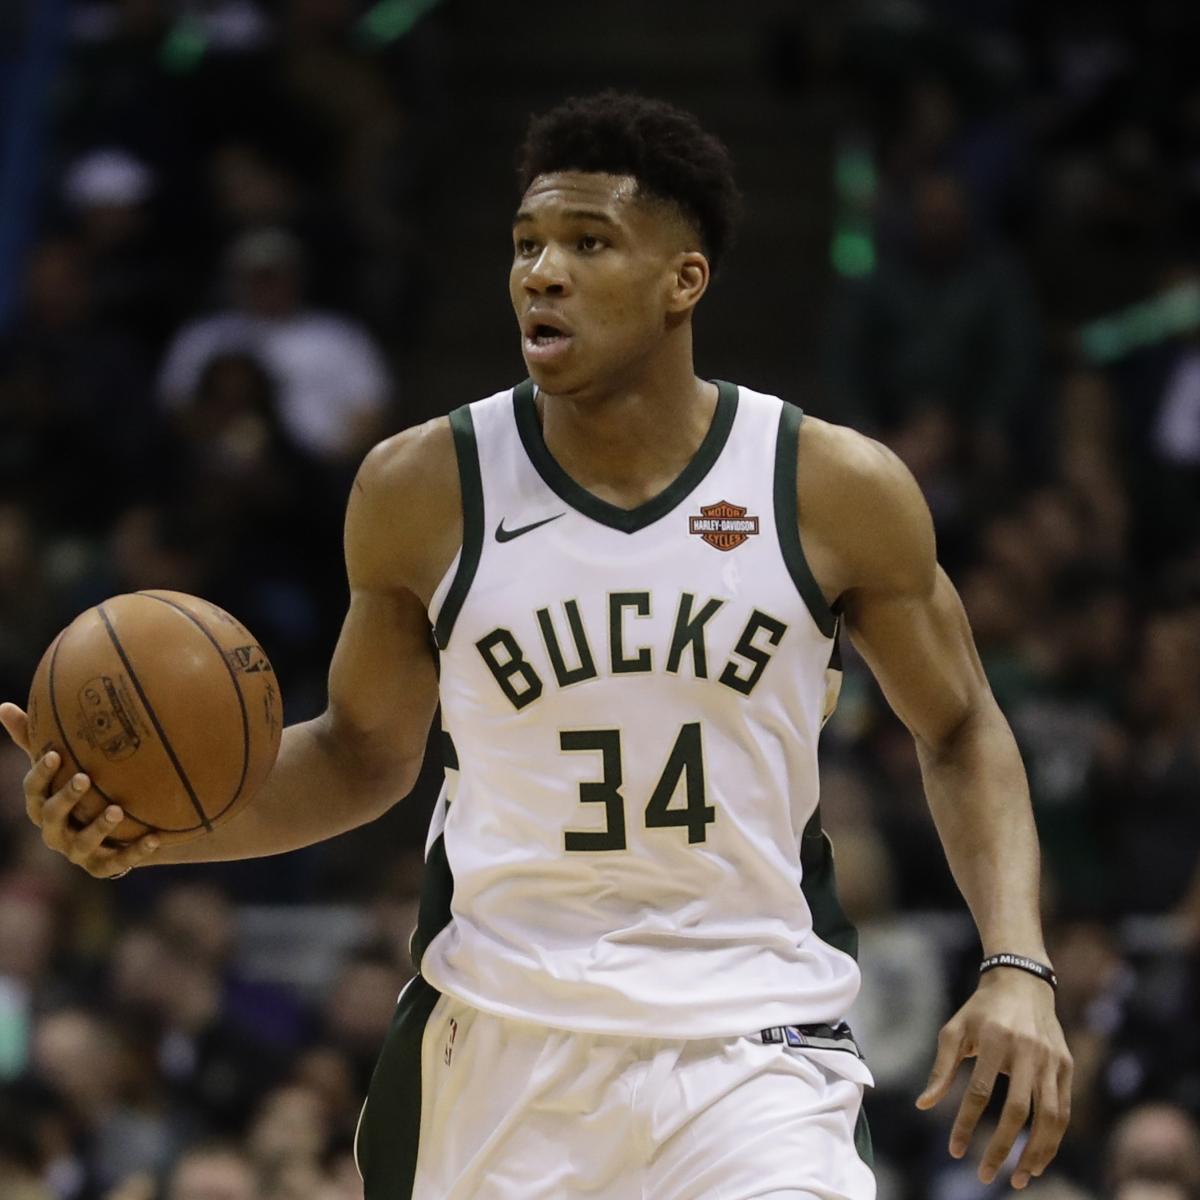 Giannis Antetokounmpo's 1st Nike Signature Shoe Appears to Leak on